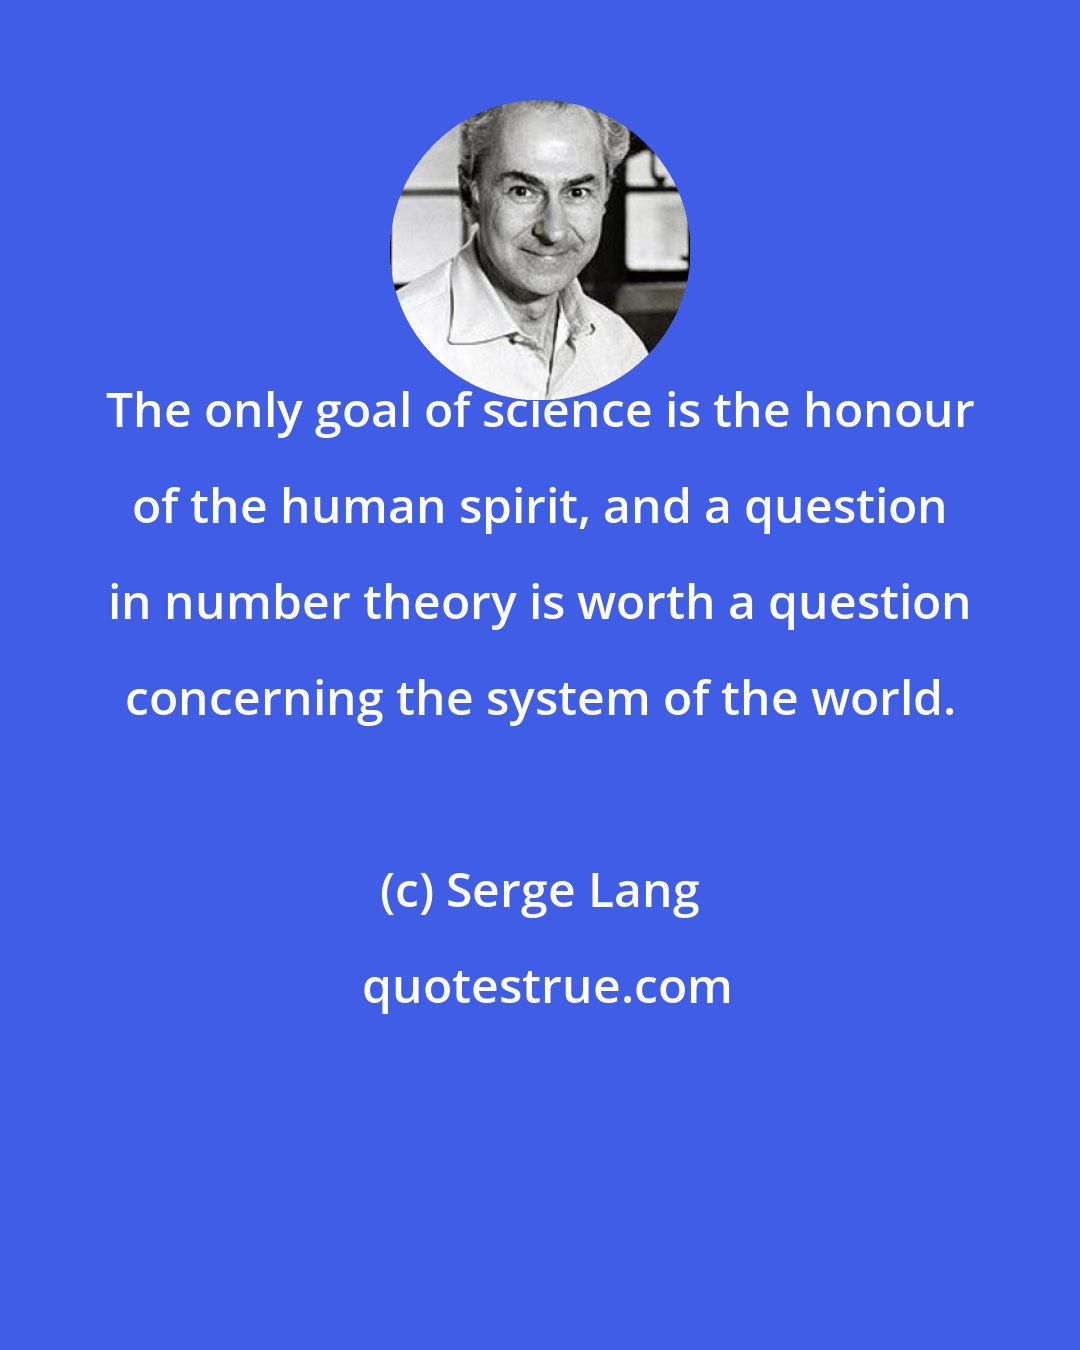 Serge Lang: The only goal of science is the honour of the human spirit, and a question in number theory is worth a question concerning the system of the world.